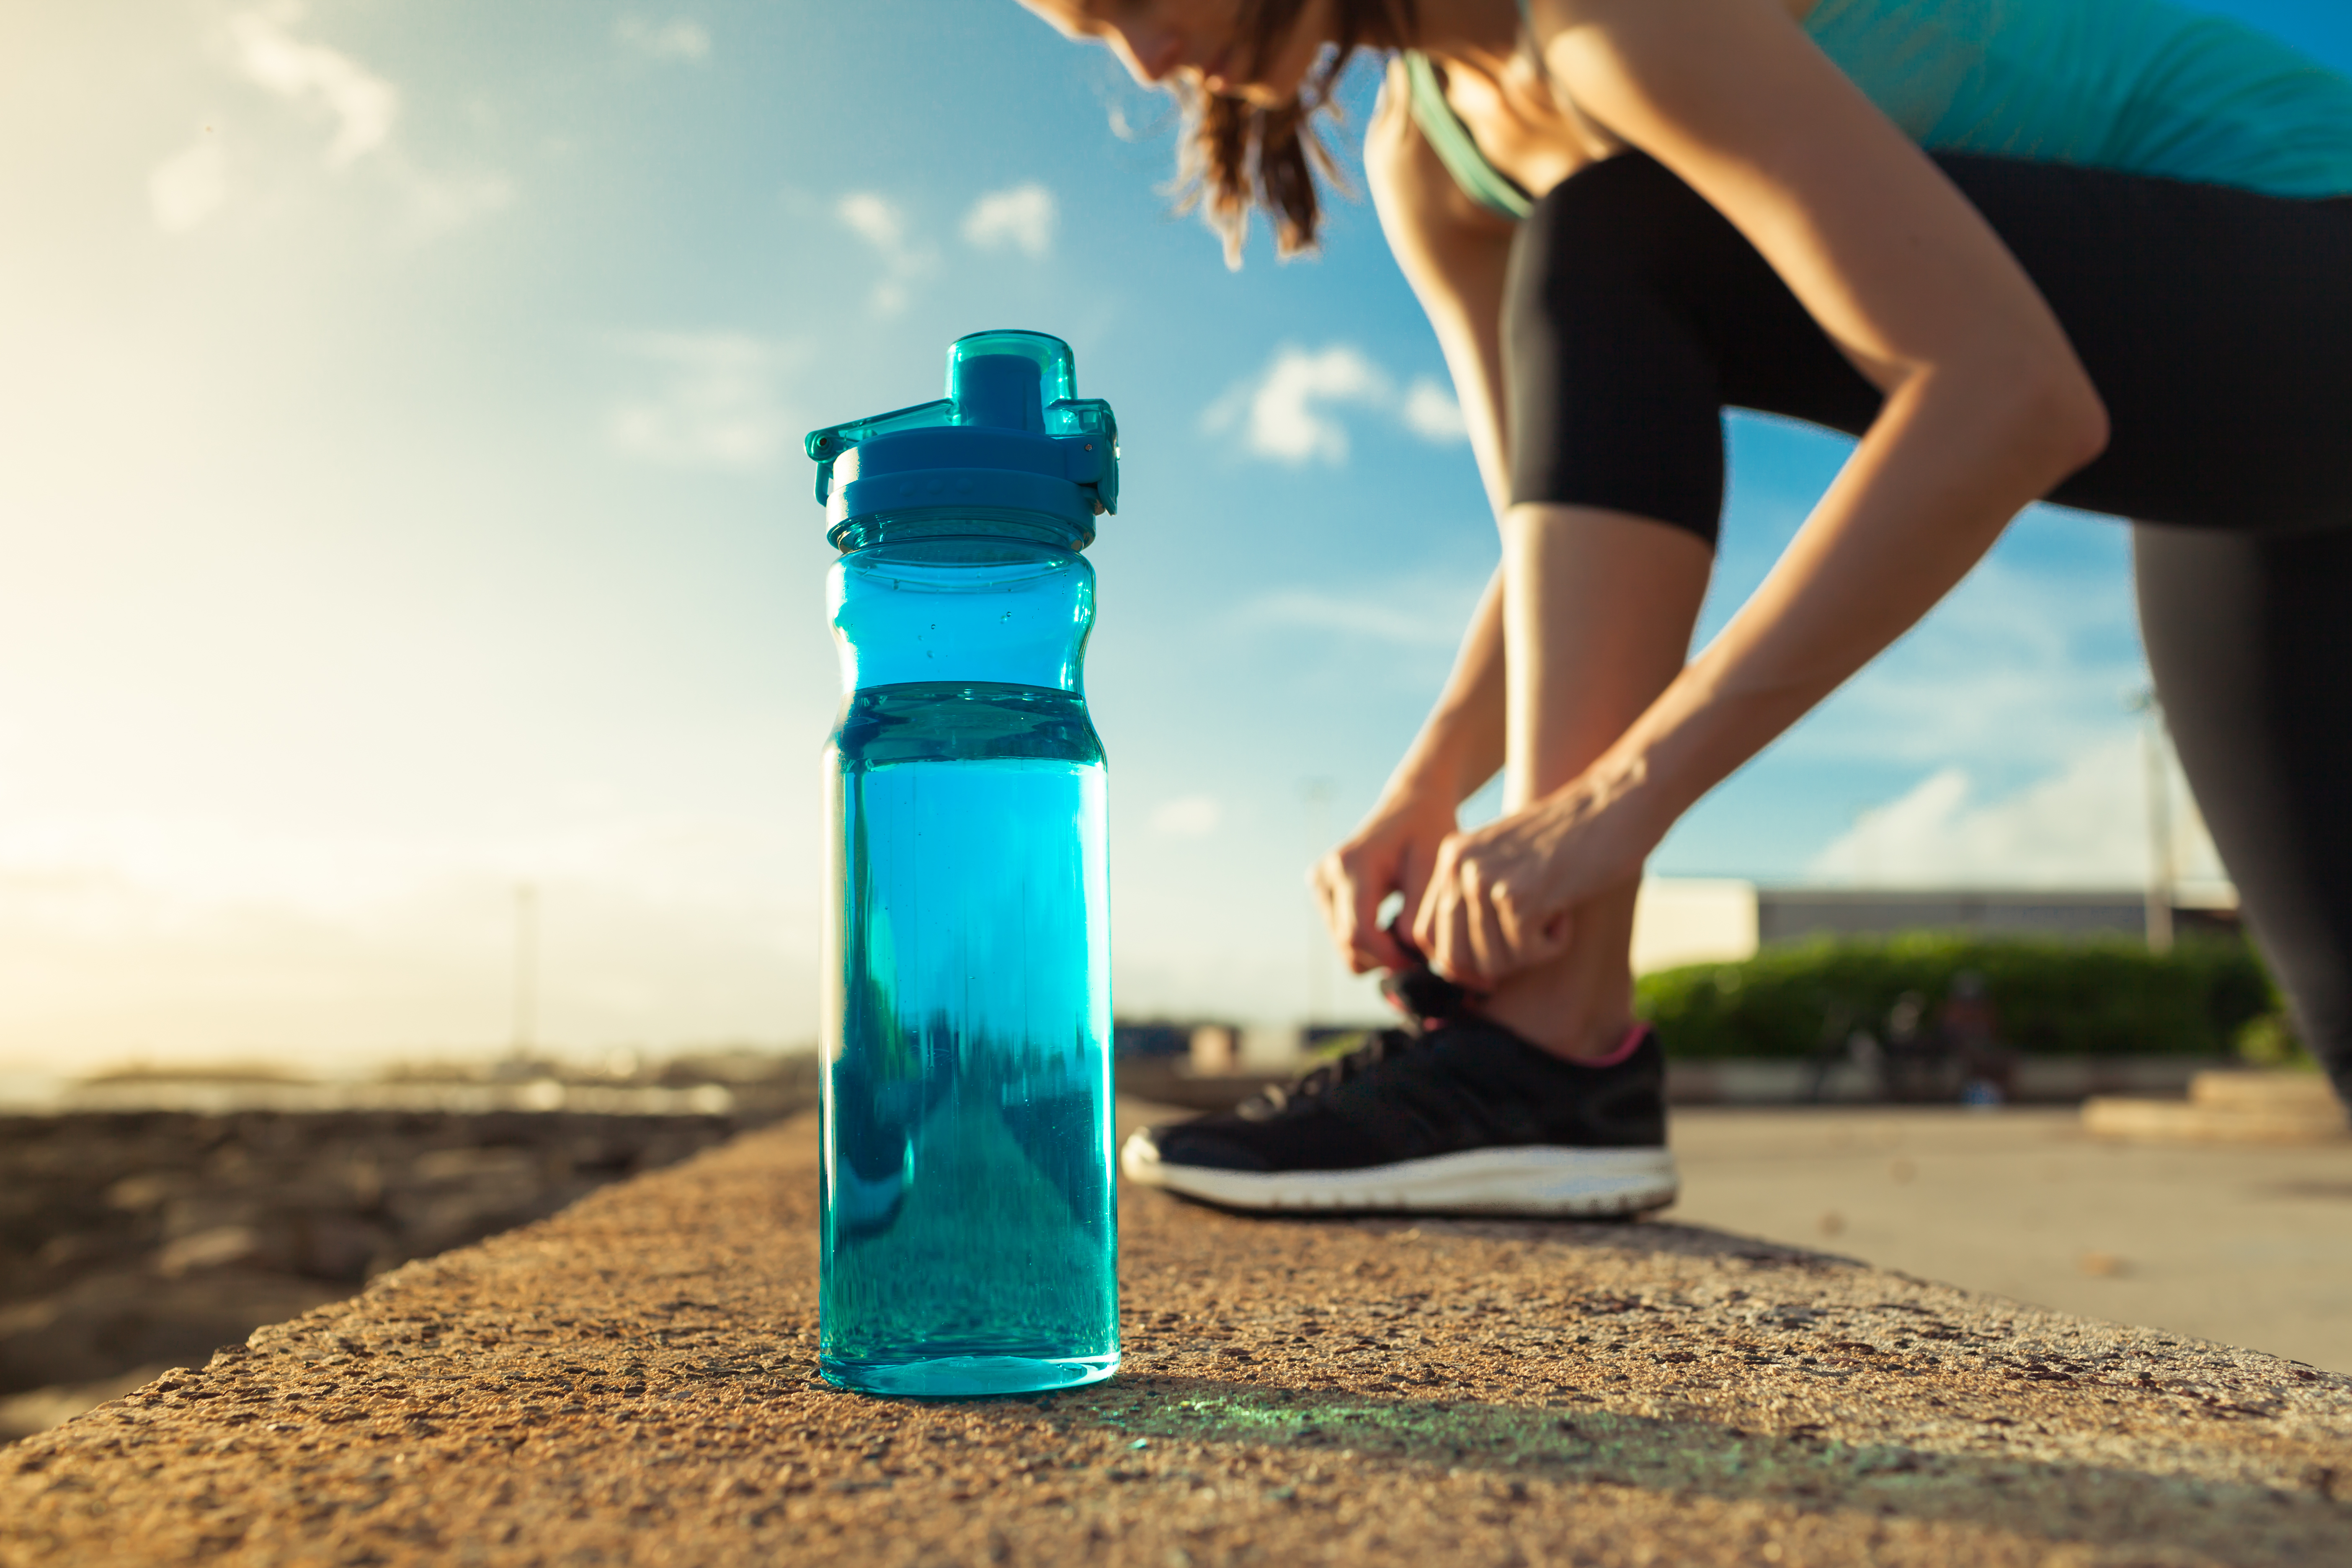 How OFTEN Should You Clean a Reusable Water Bottle?